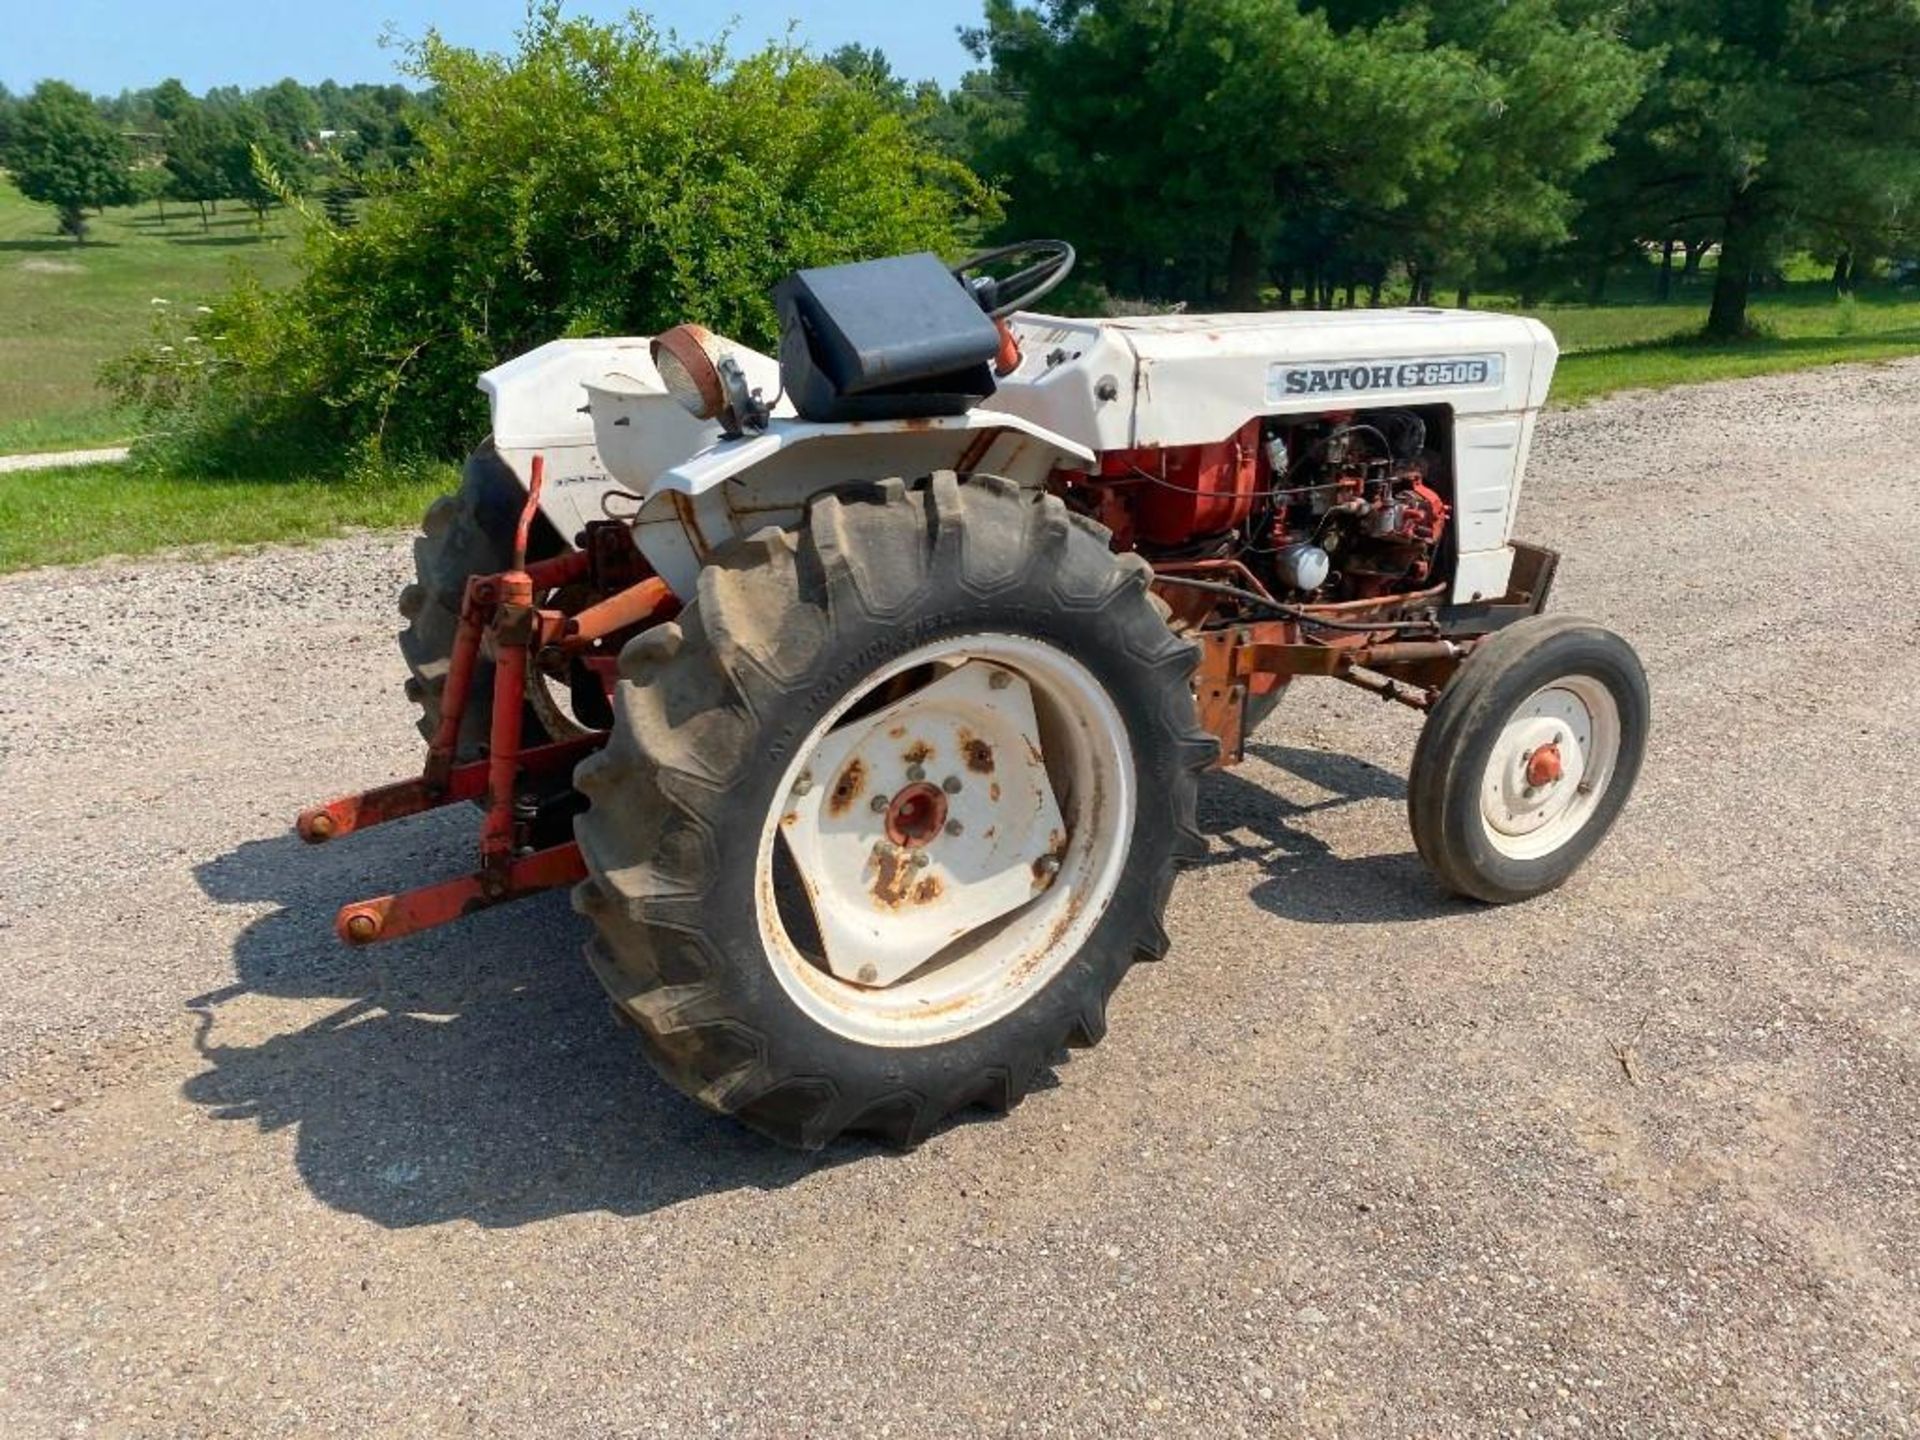 1978 Satoh S-650G Tractor - Image 7 of 26